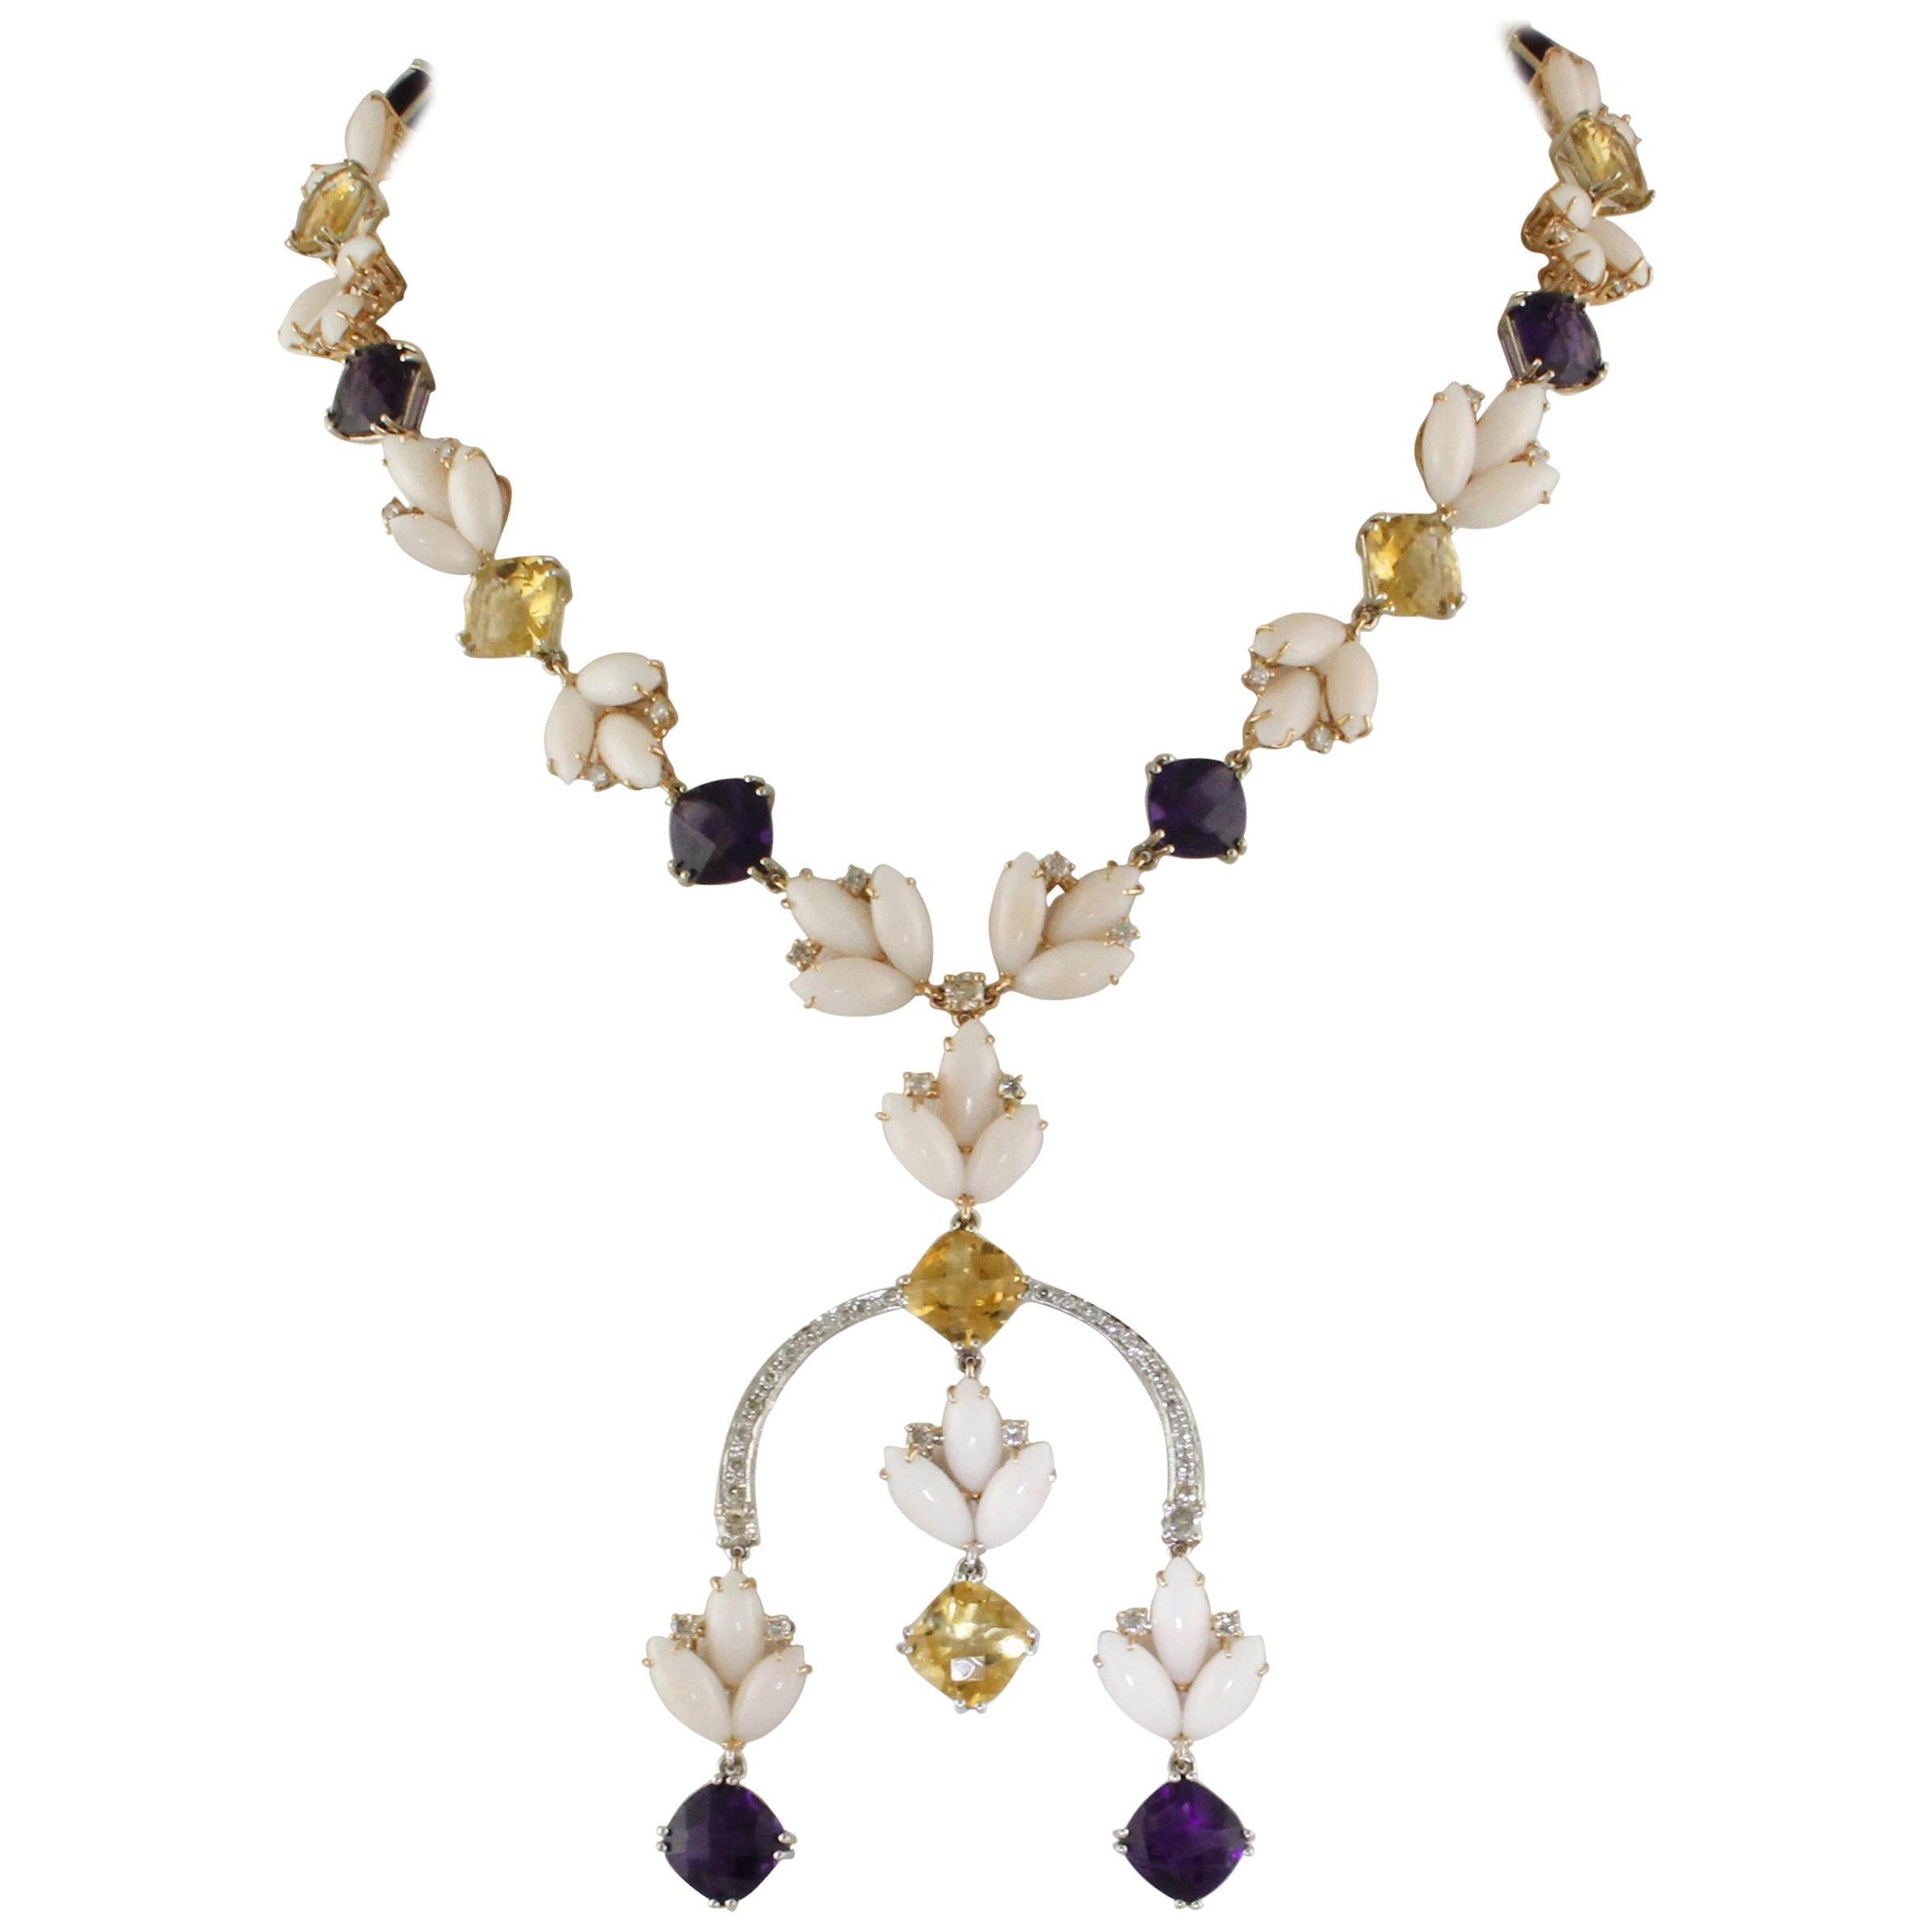 Diamonds, Amethysts, Topazes Pink Corals Drops White and Rose Gold Link Necklace